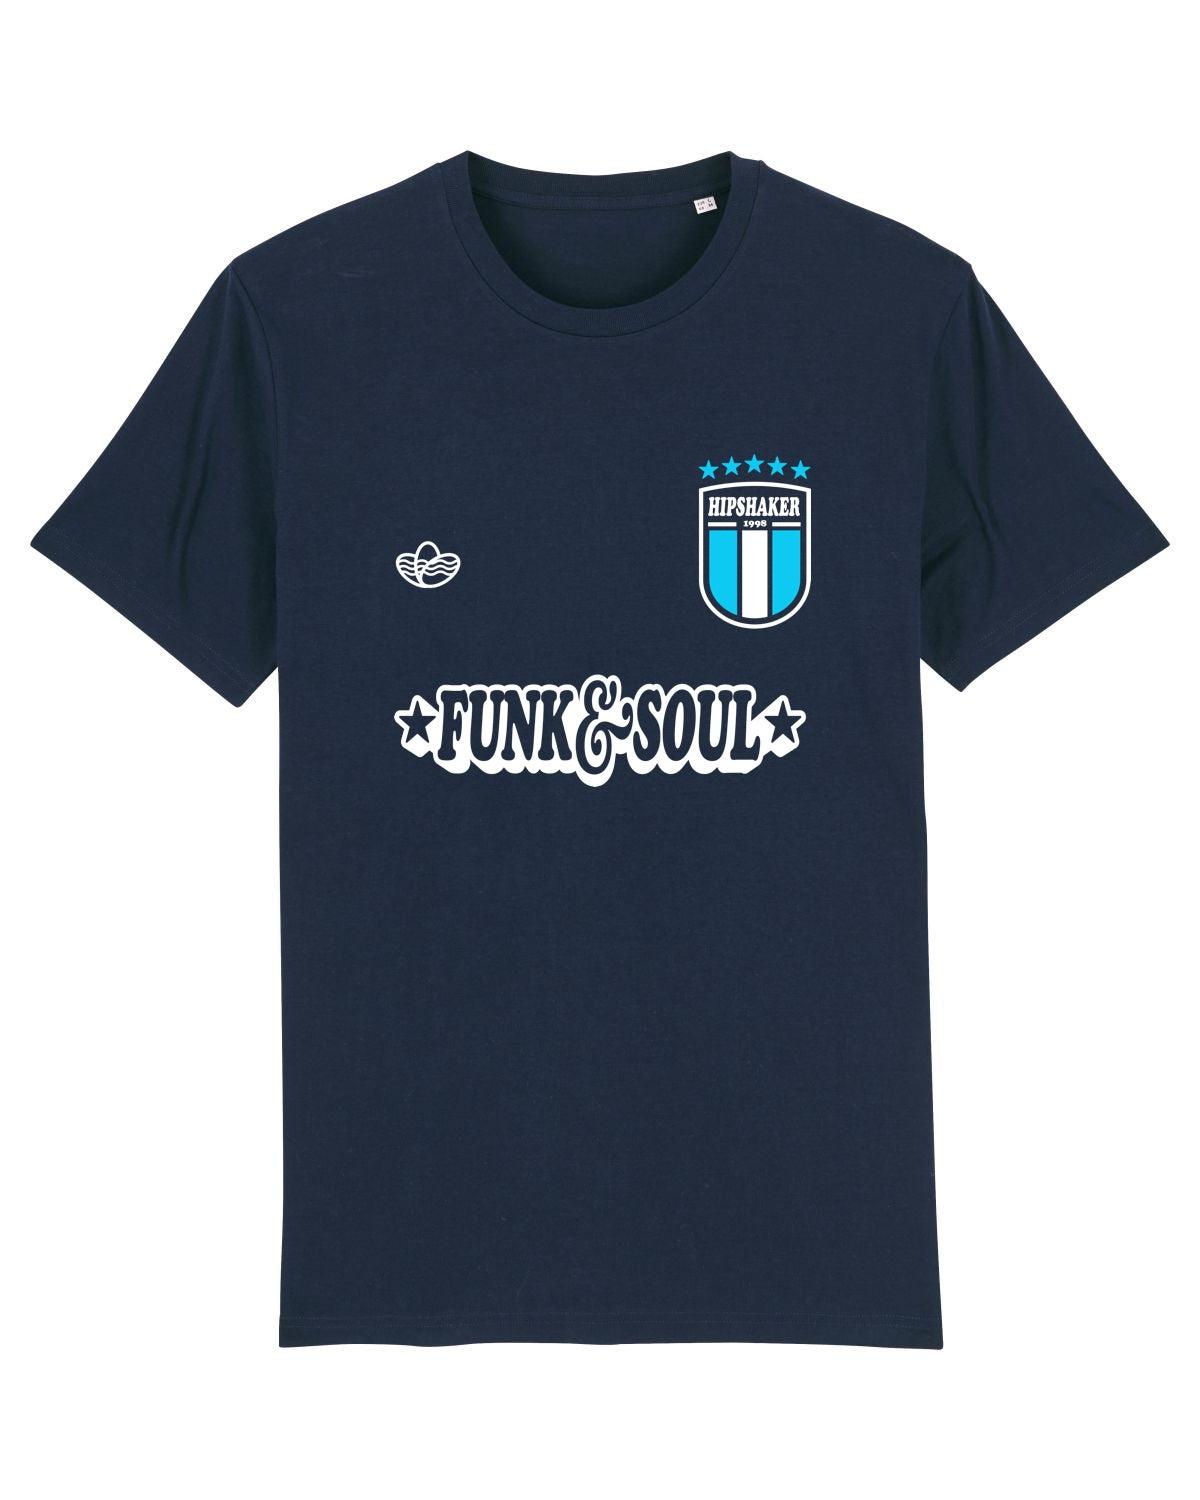 HIPSHAKER FC: T-Shirt Official Merchandise of Hipshaker (4 Colour Options) - SOUND IS COLOUR